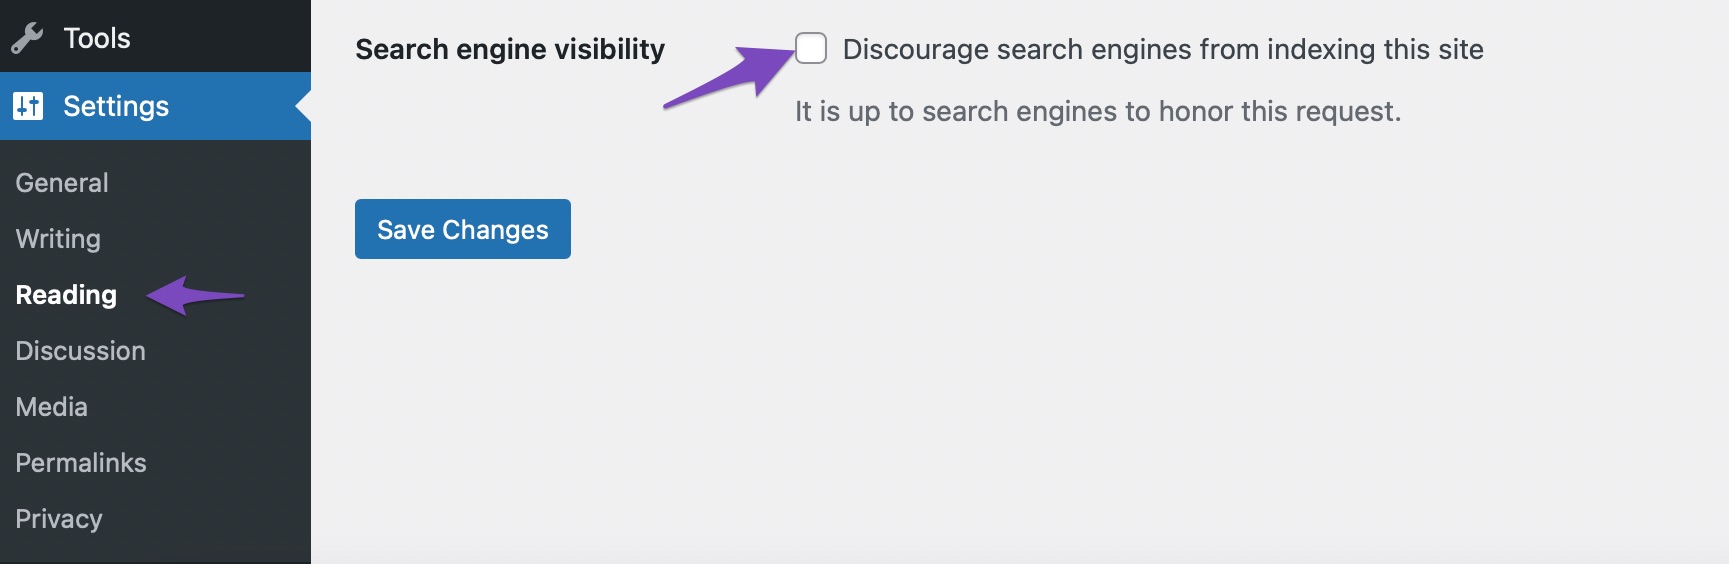 Search engine visibility test from settings